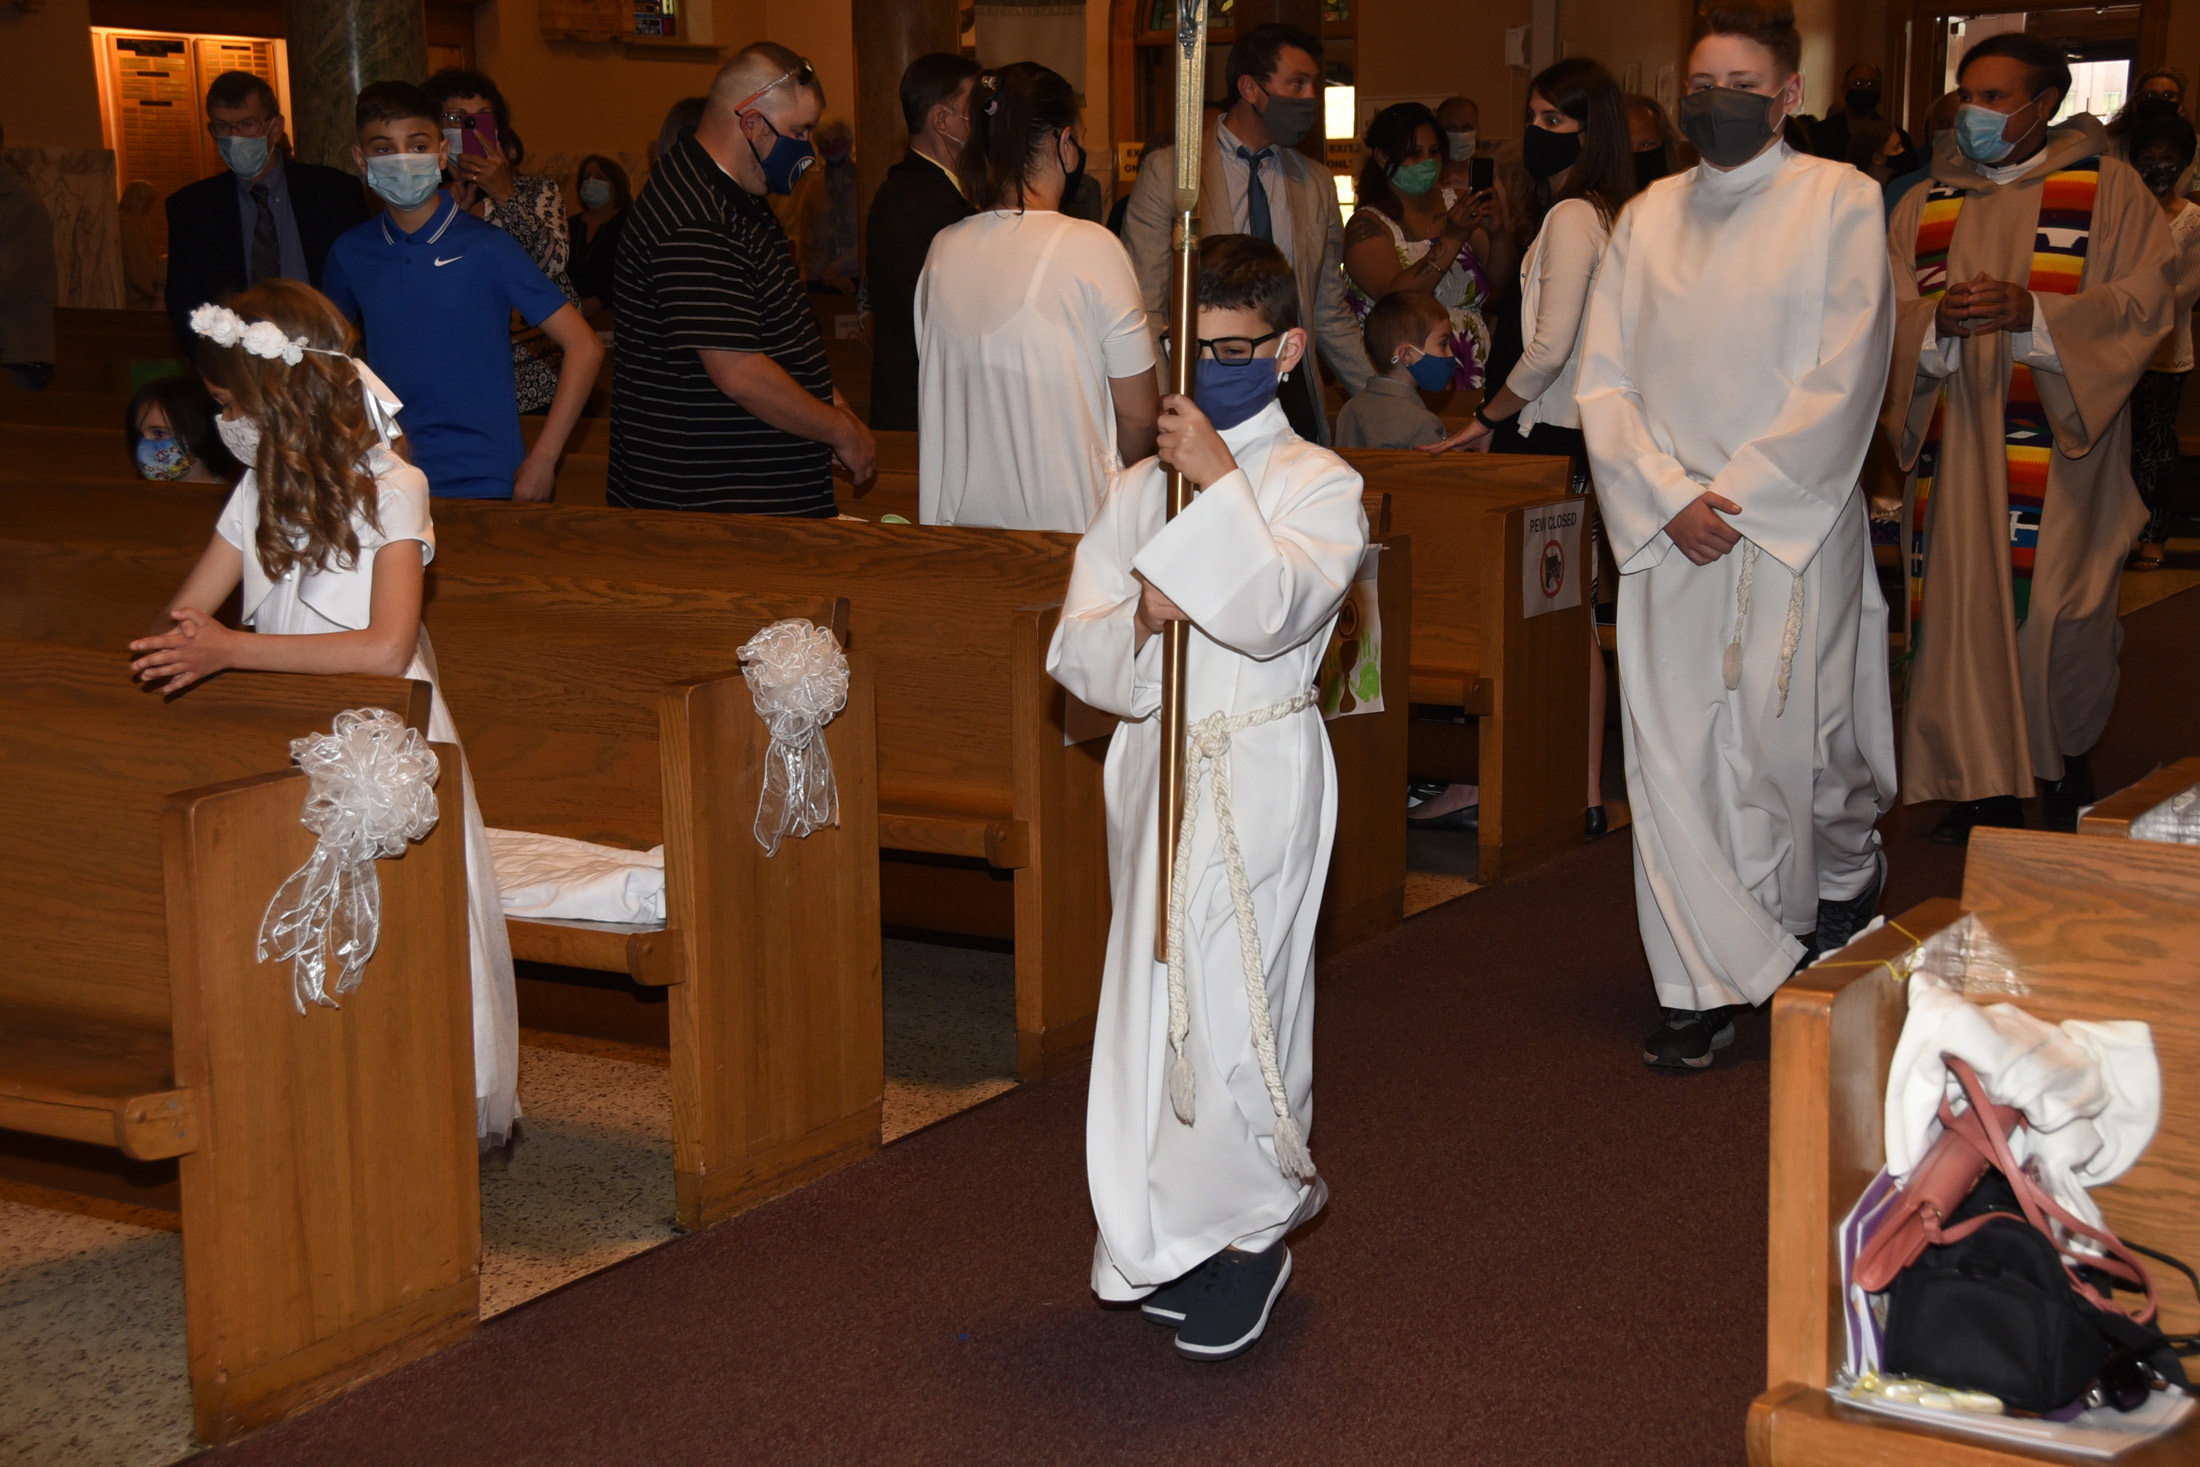 FIRST-COMMUNION-MAY-15-2021-10011066